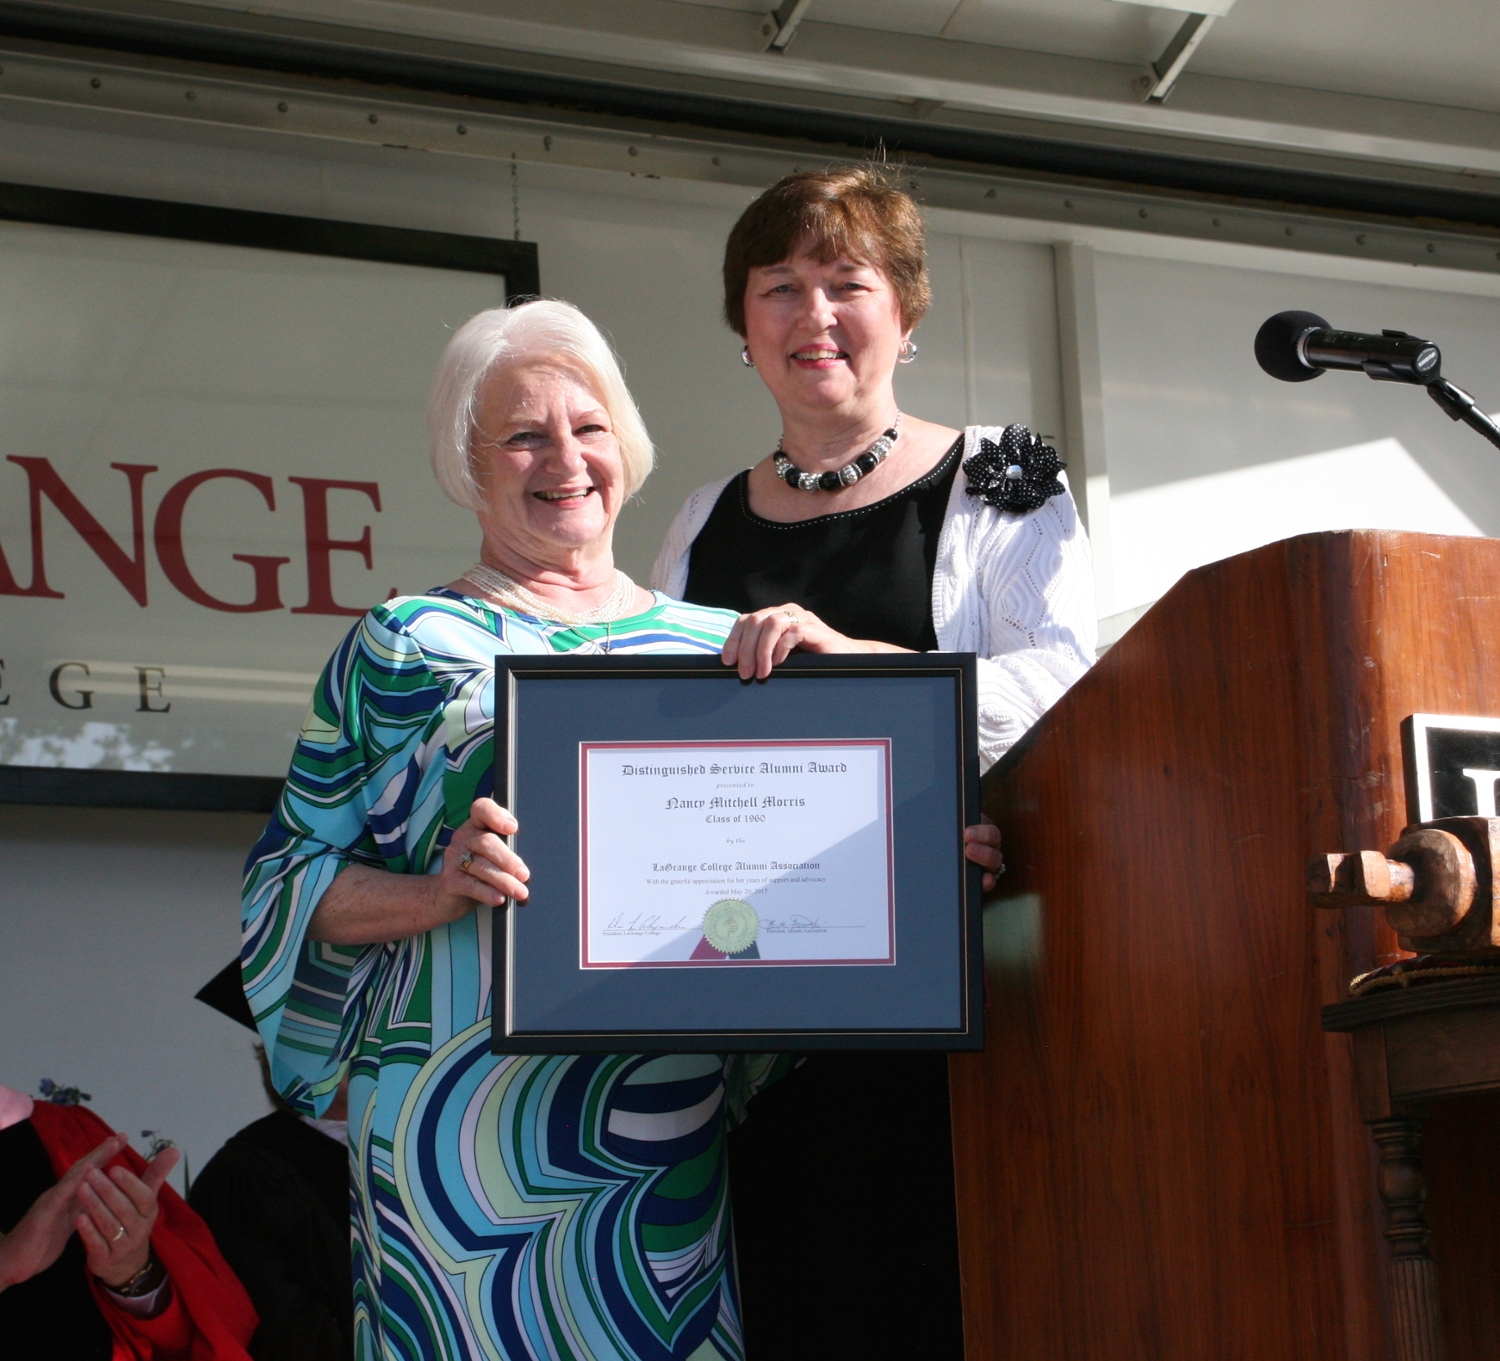 Nancy Morriss '64 receiving the Dinstinguished Service Alumni Award given by LaGrange College in Georgia.